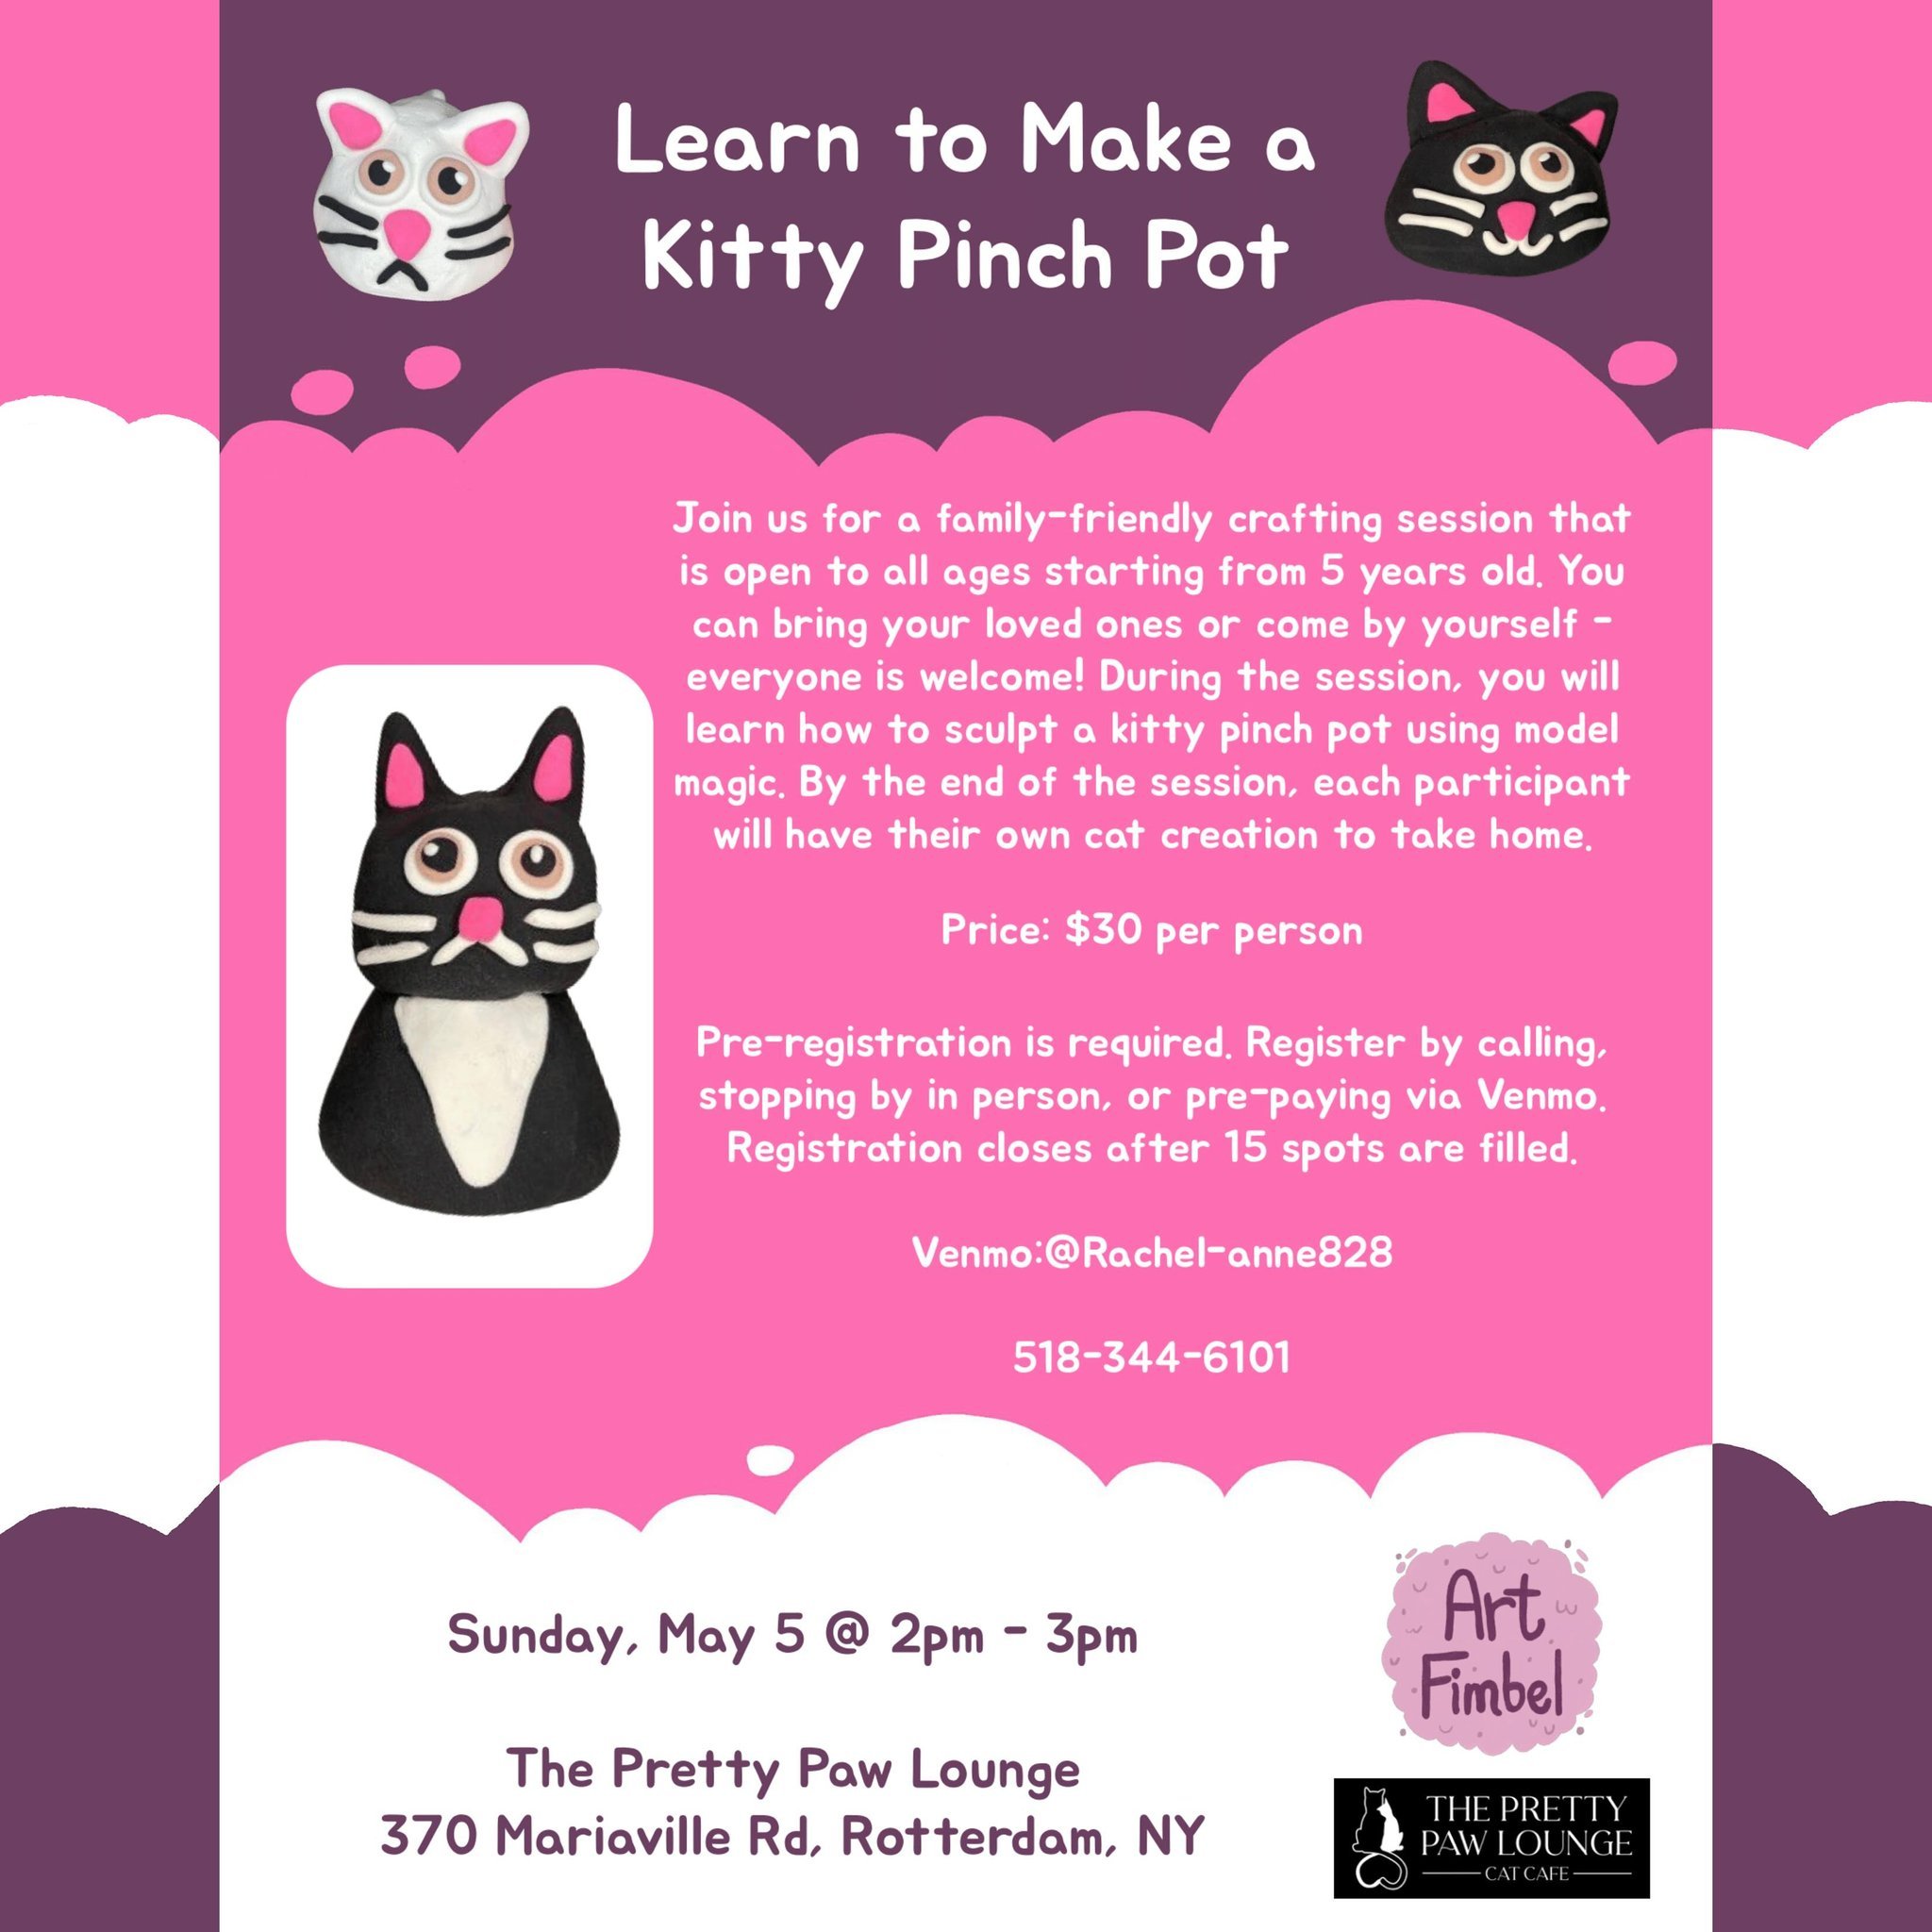 THIS SUNDAY! Join me at The Pretty Paw Lounge for a family friendly model magic crafting session. If you have any questions, don&rsquo;t hesitate to ask! 💜🩷

#artistsofinstagram #artistsoftiktok #smallartist #smallartaccount #illustrationartists  #